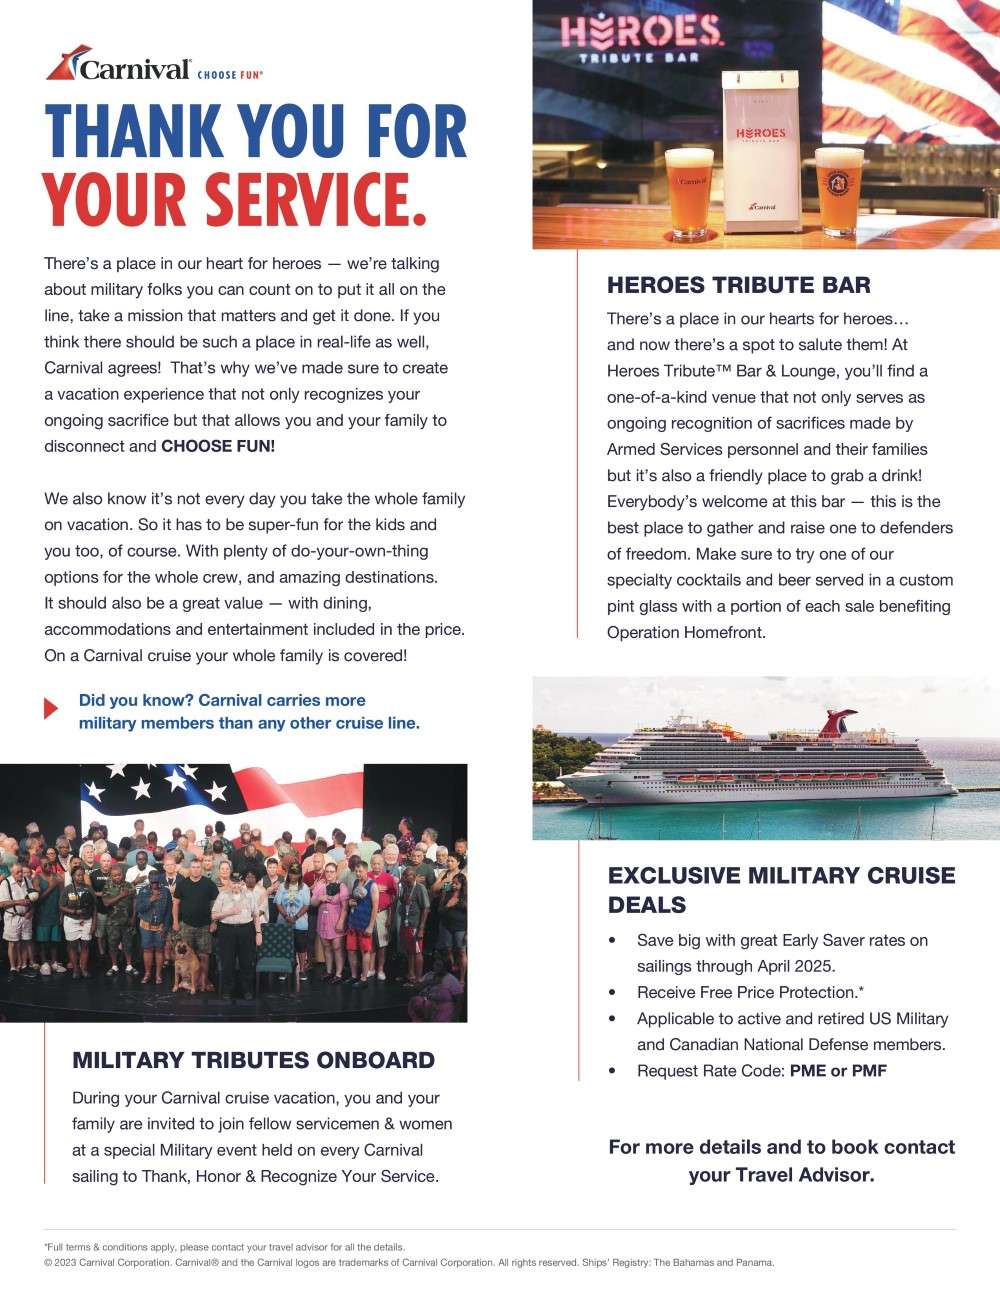 Carnival military cruise vacation deals